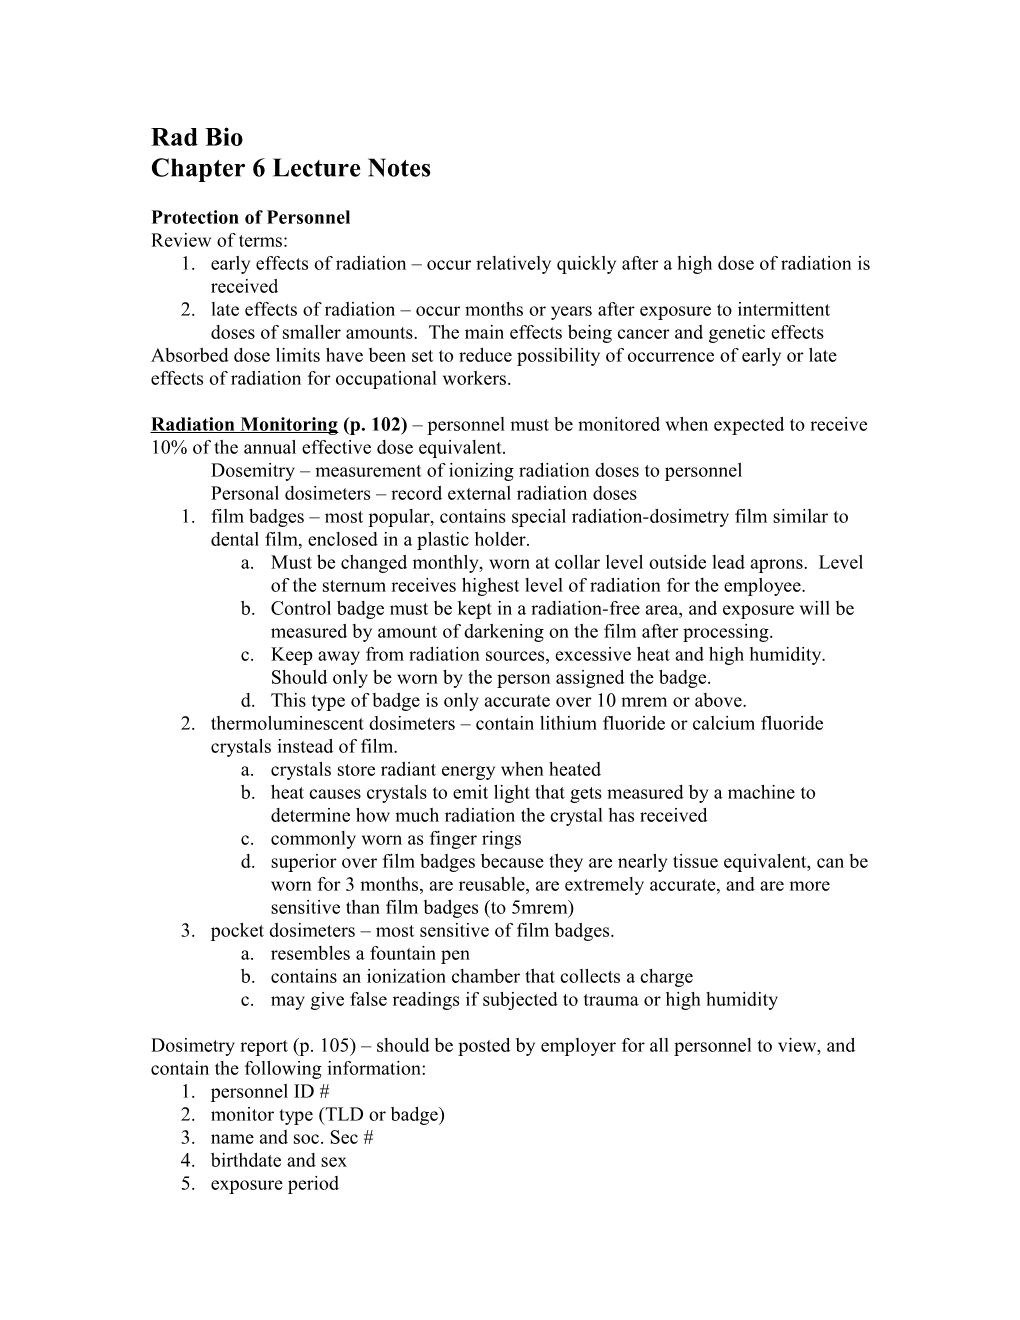 Chapter 6 Lecture Notes